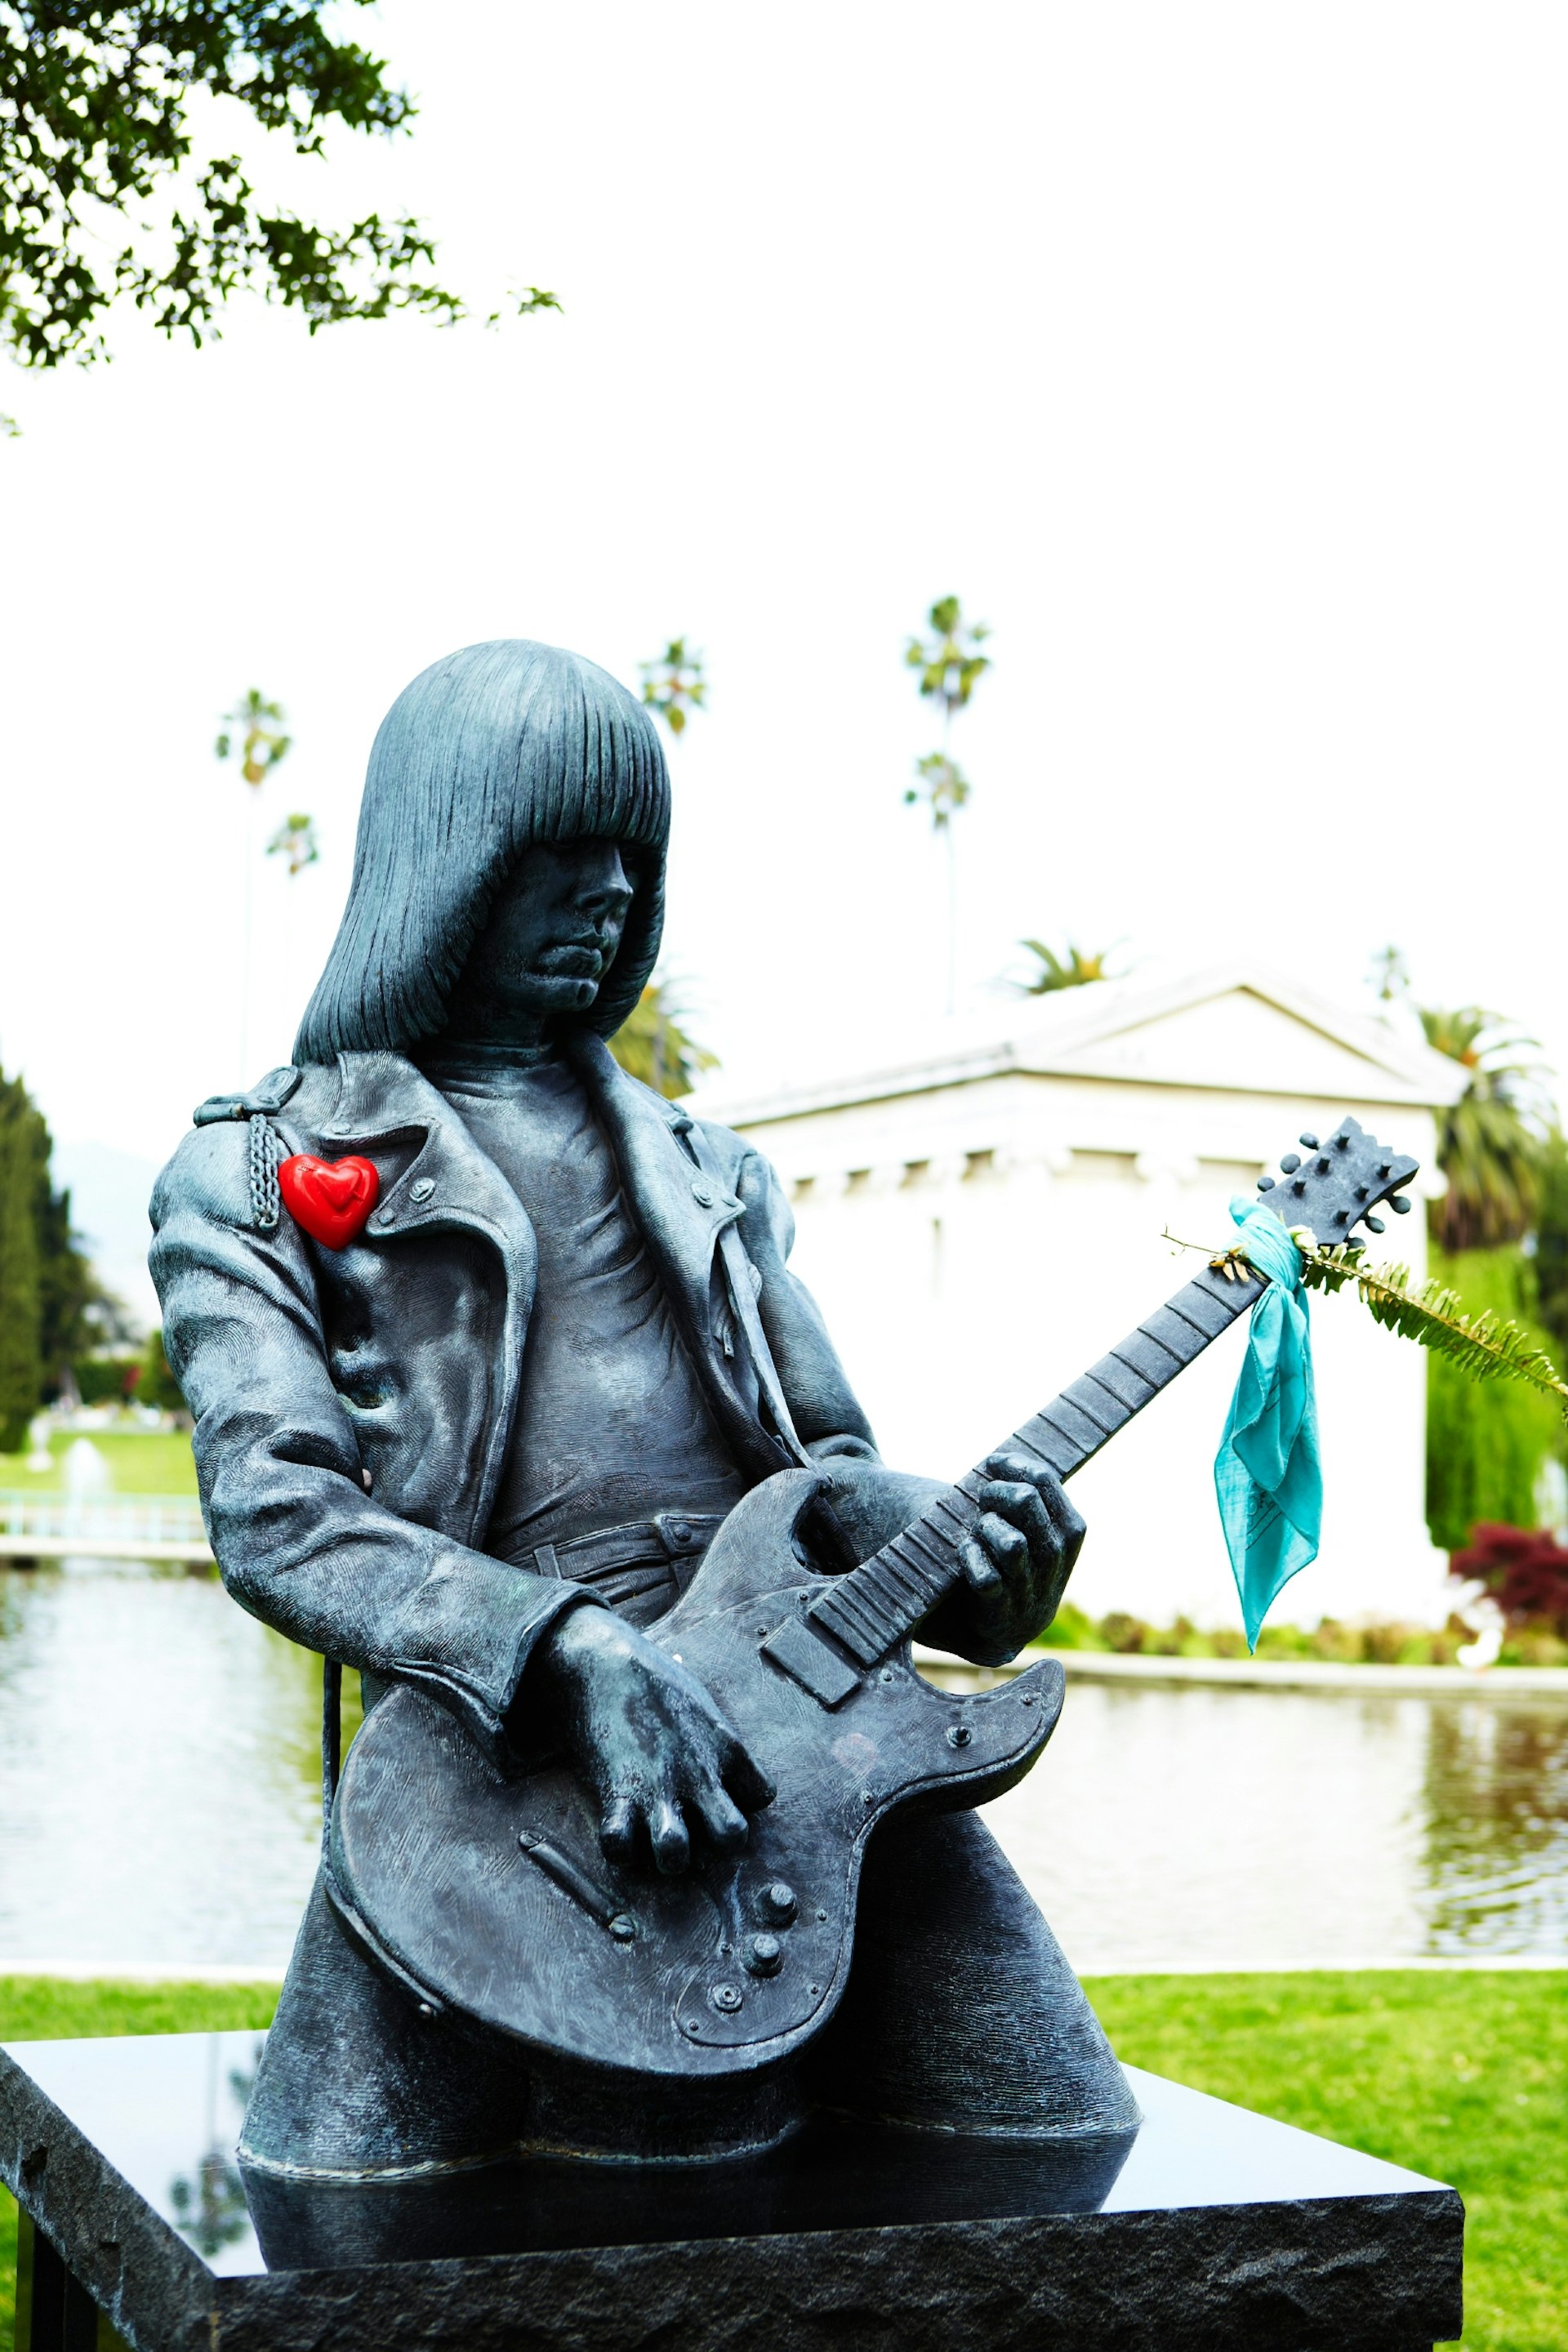 A statue of a long-haired rocker playing the guitar. The guitar has a green scarf tied to it, which holds a piece of fern at the end of the fret board